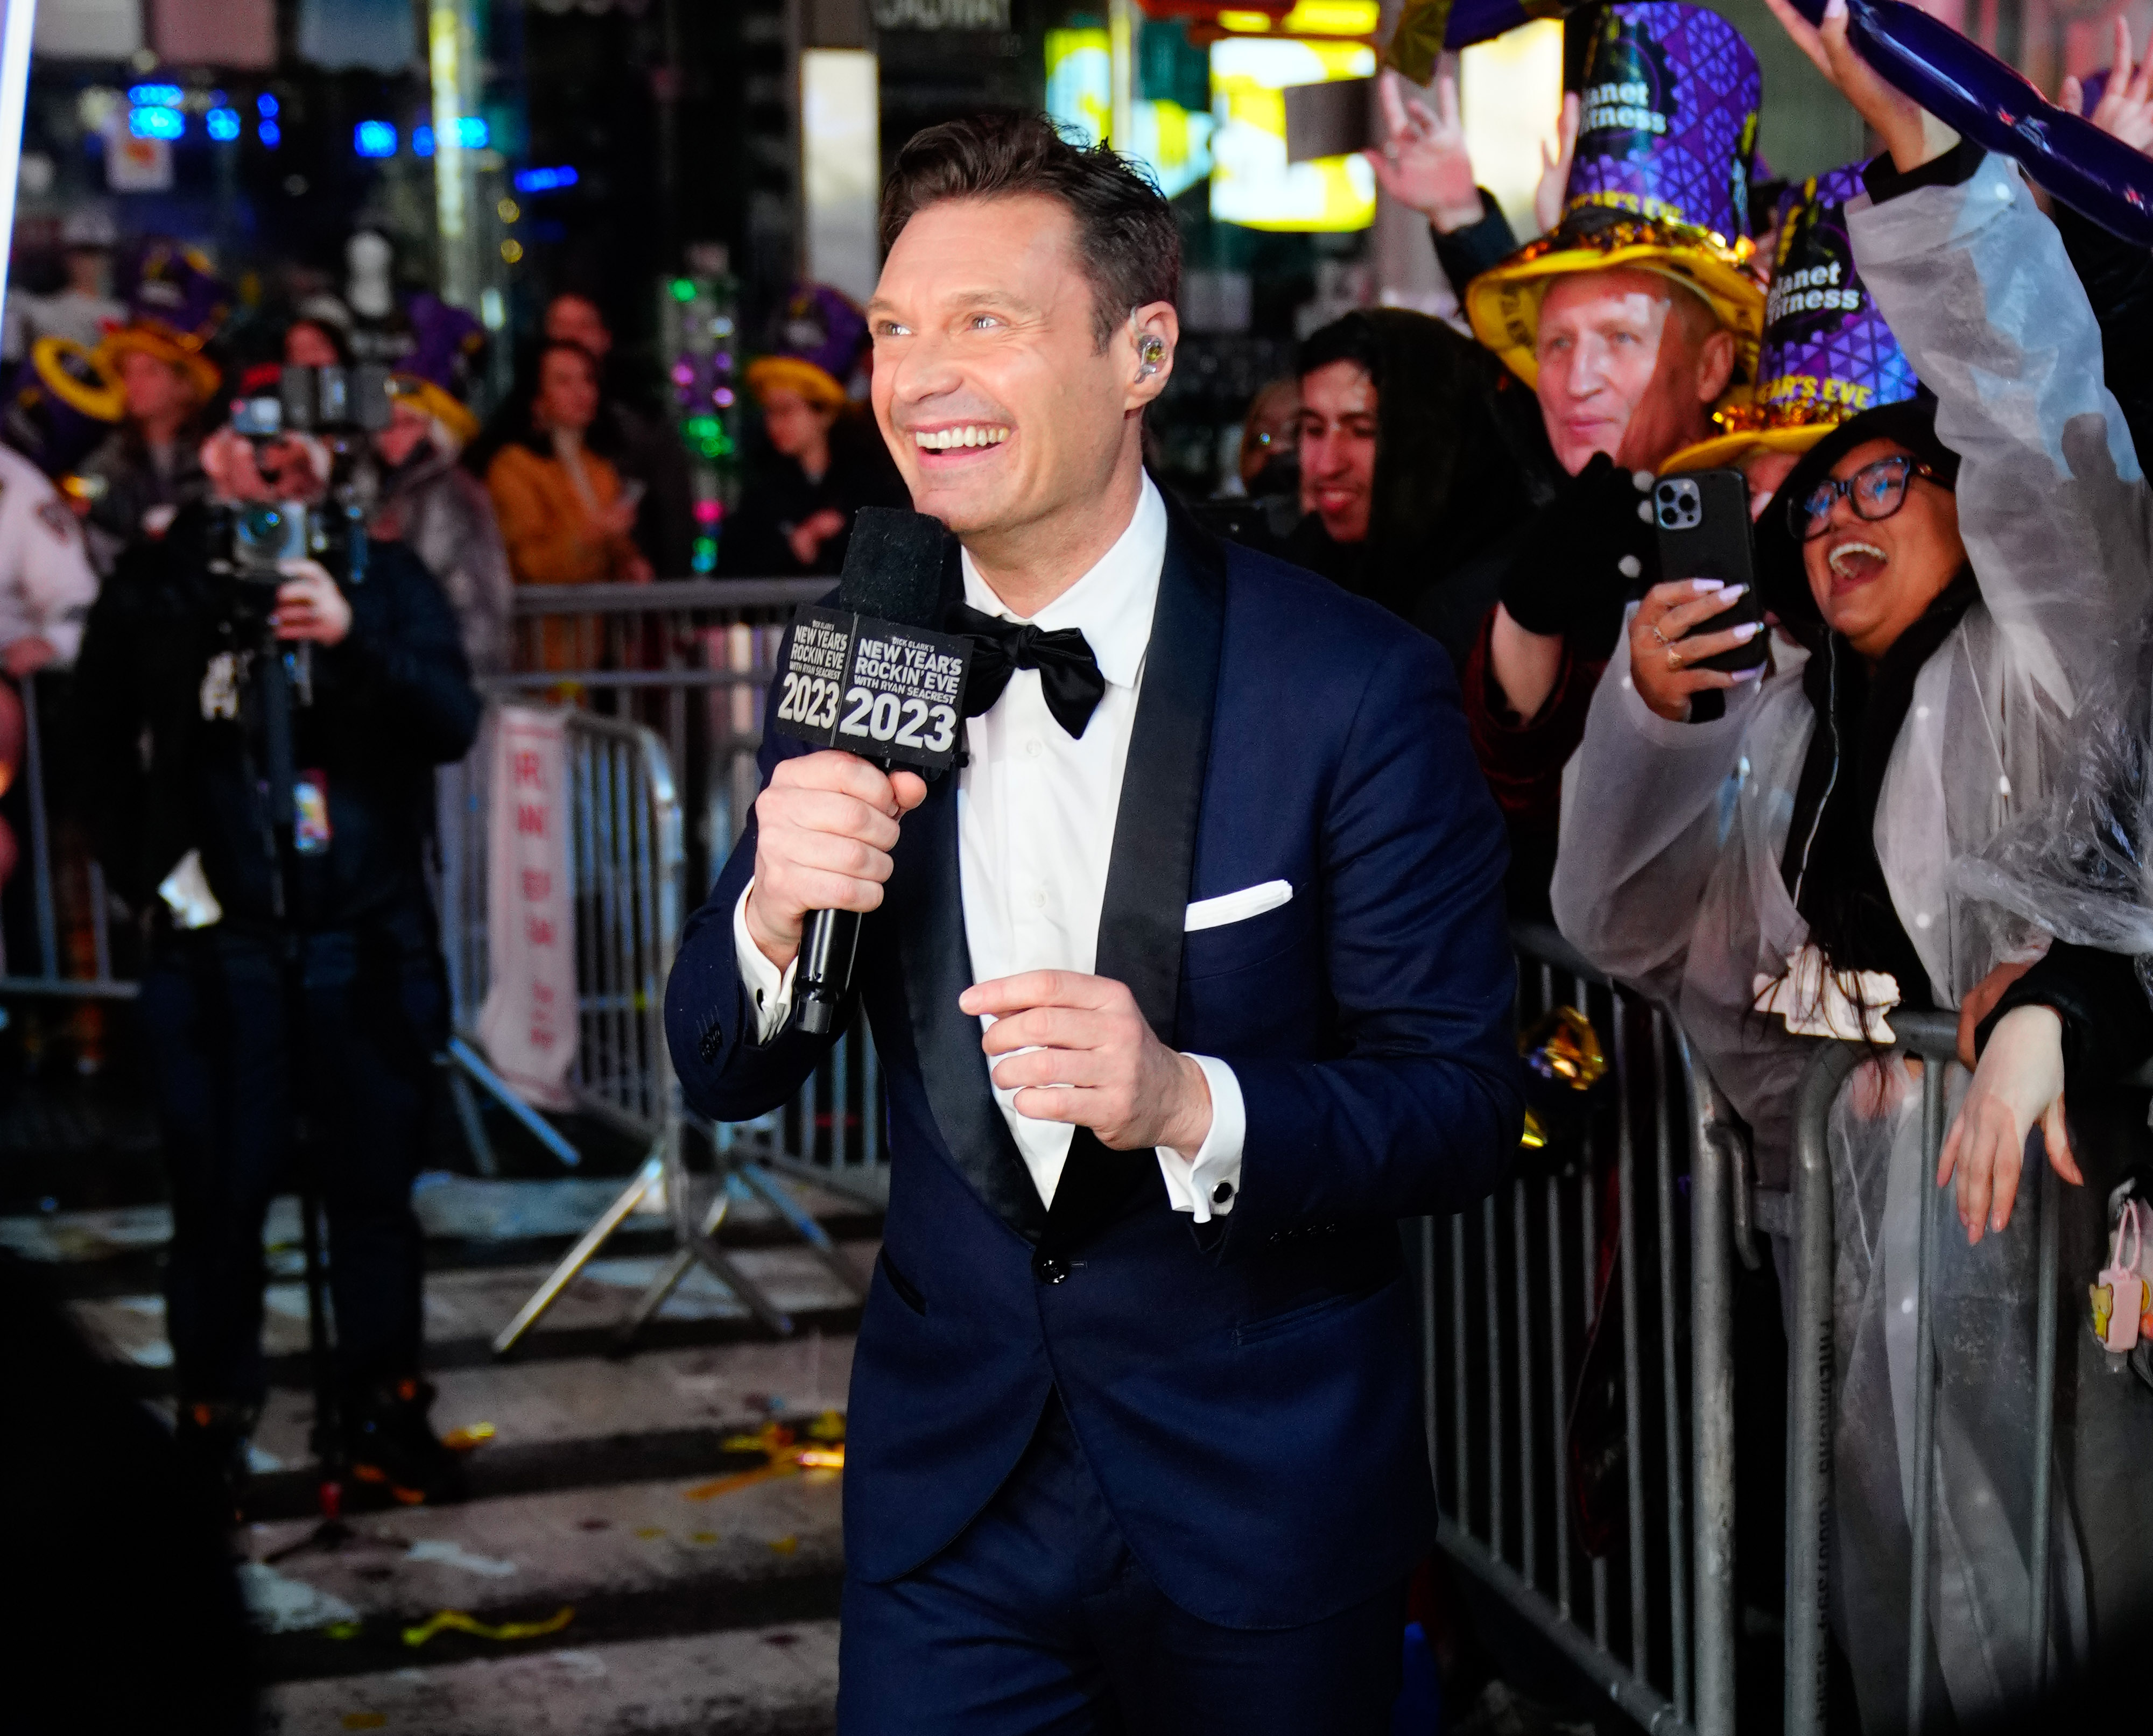 Among his other duties, Ryan also hosts Dick Clark’s New Year’s Rockin’ Eve